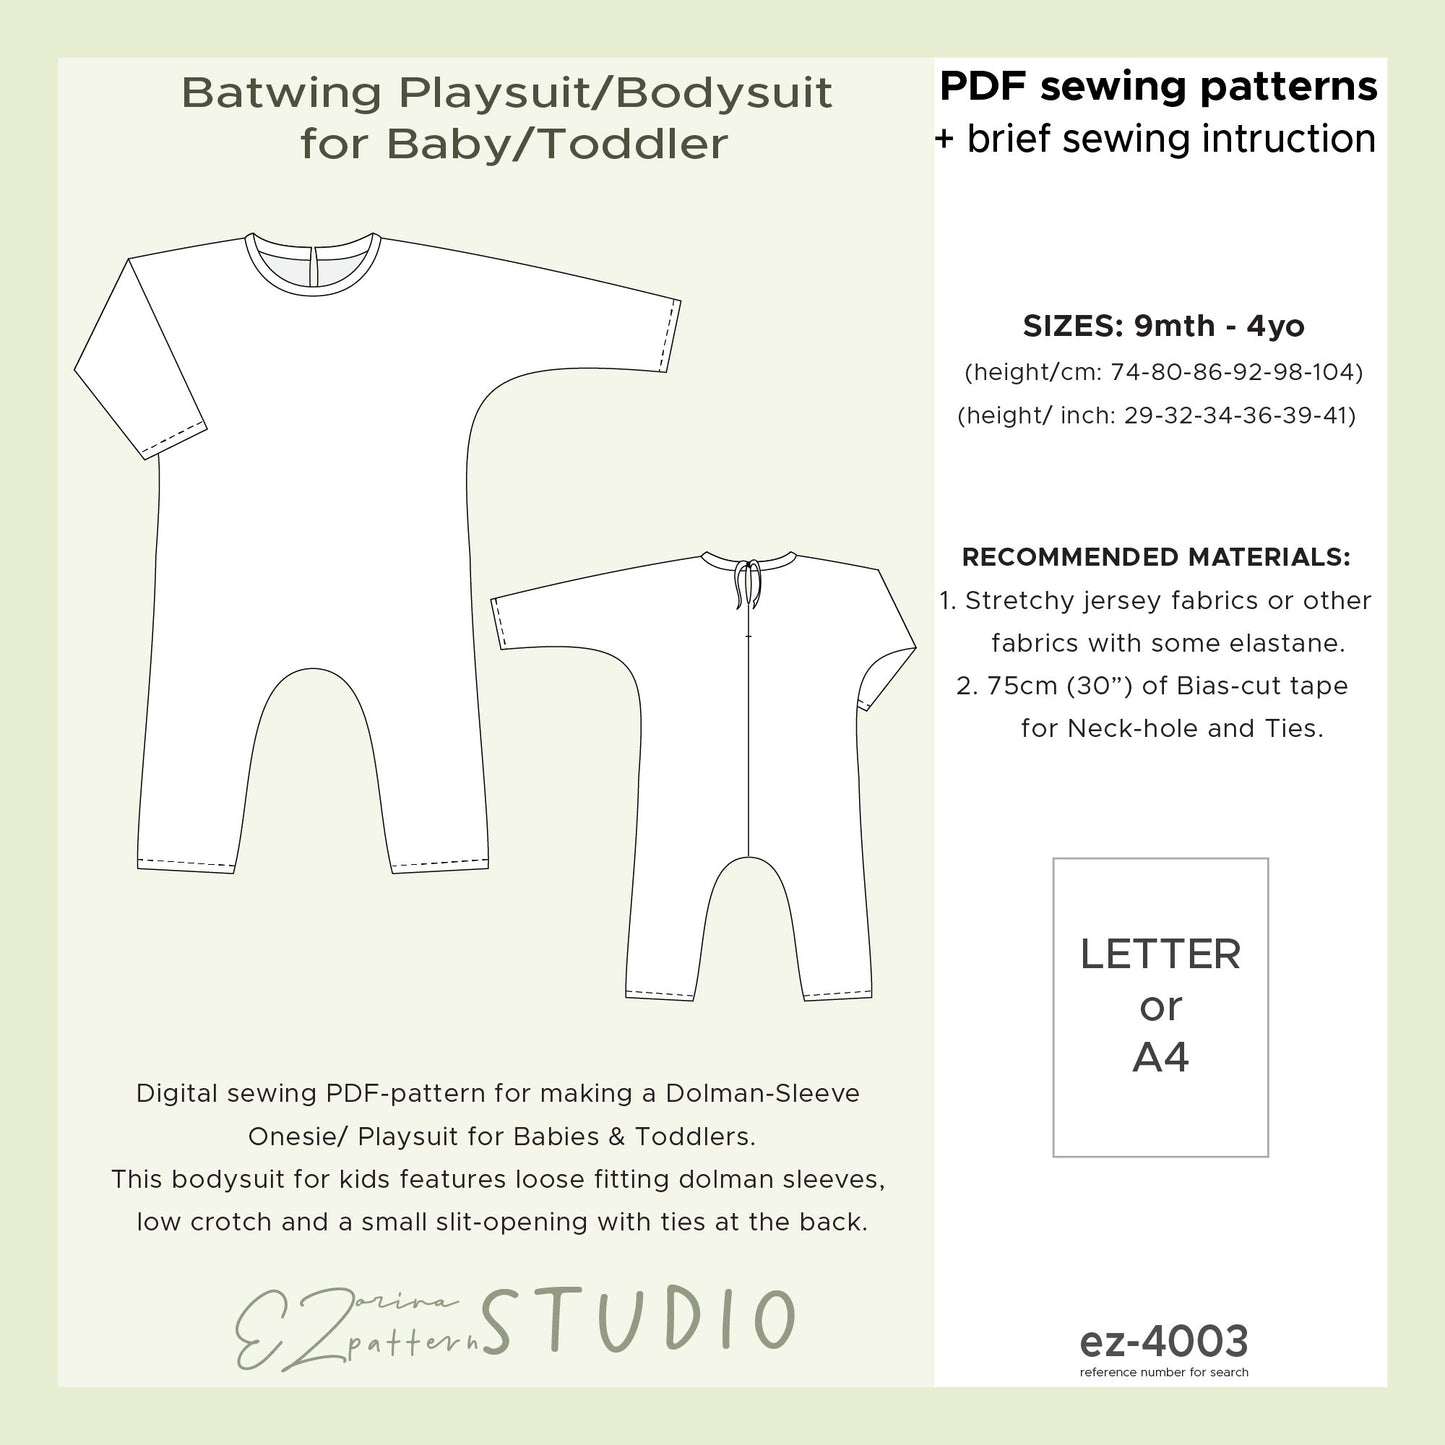 for Toddlers: Batwing Playsuit/Bodysuit